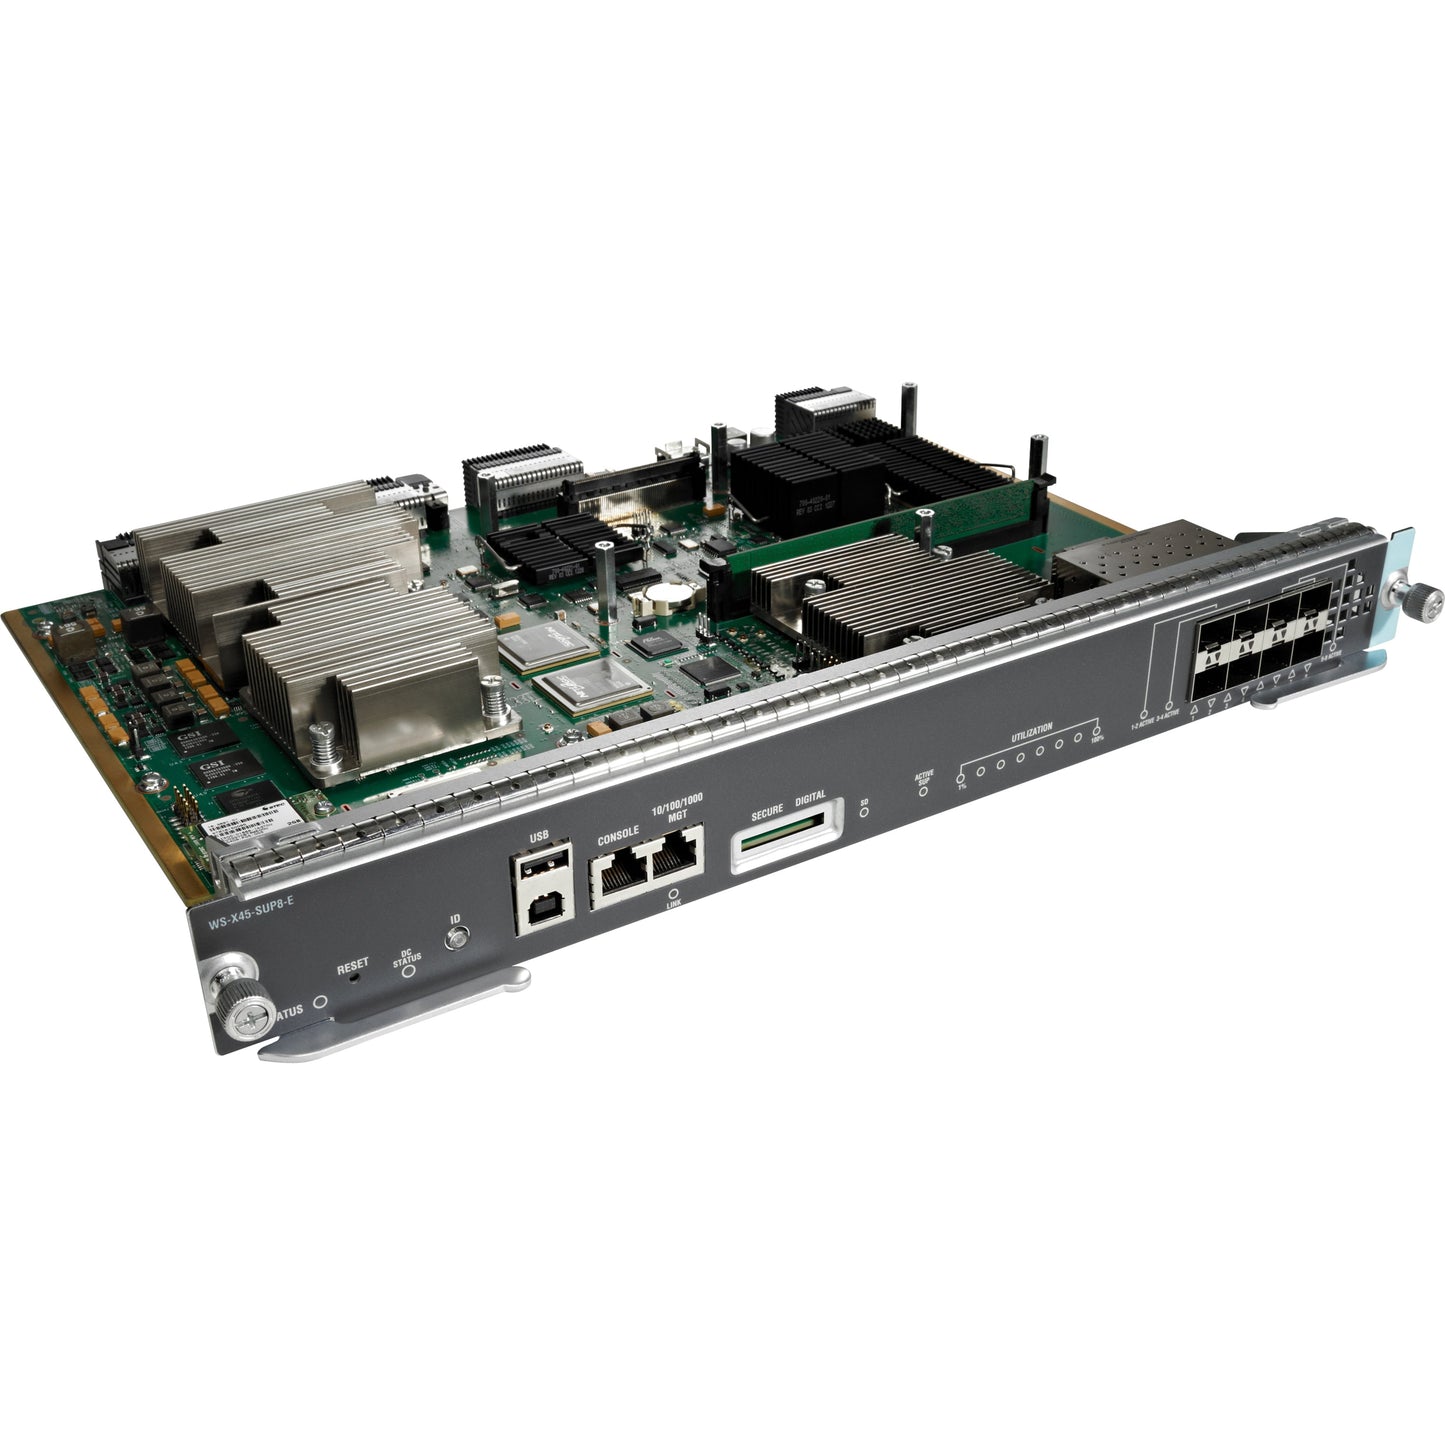 Cisco Catalyst 4500E Series Unified Access Supervisor 928 Gbps